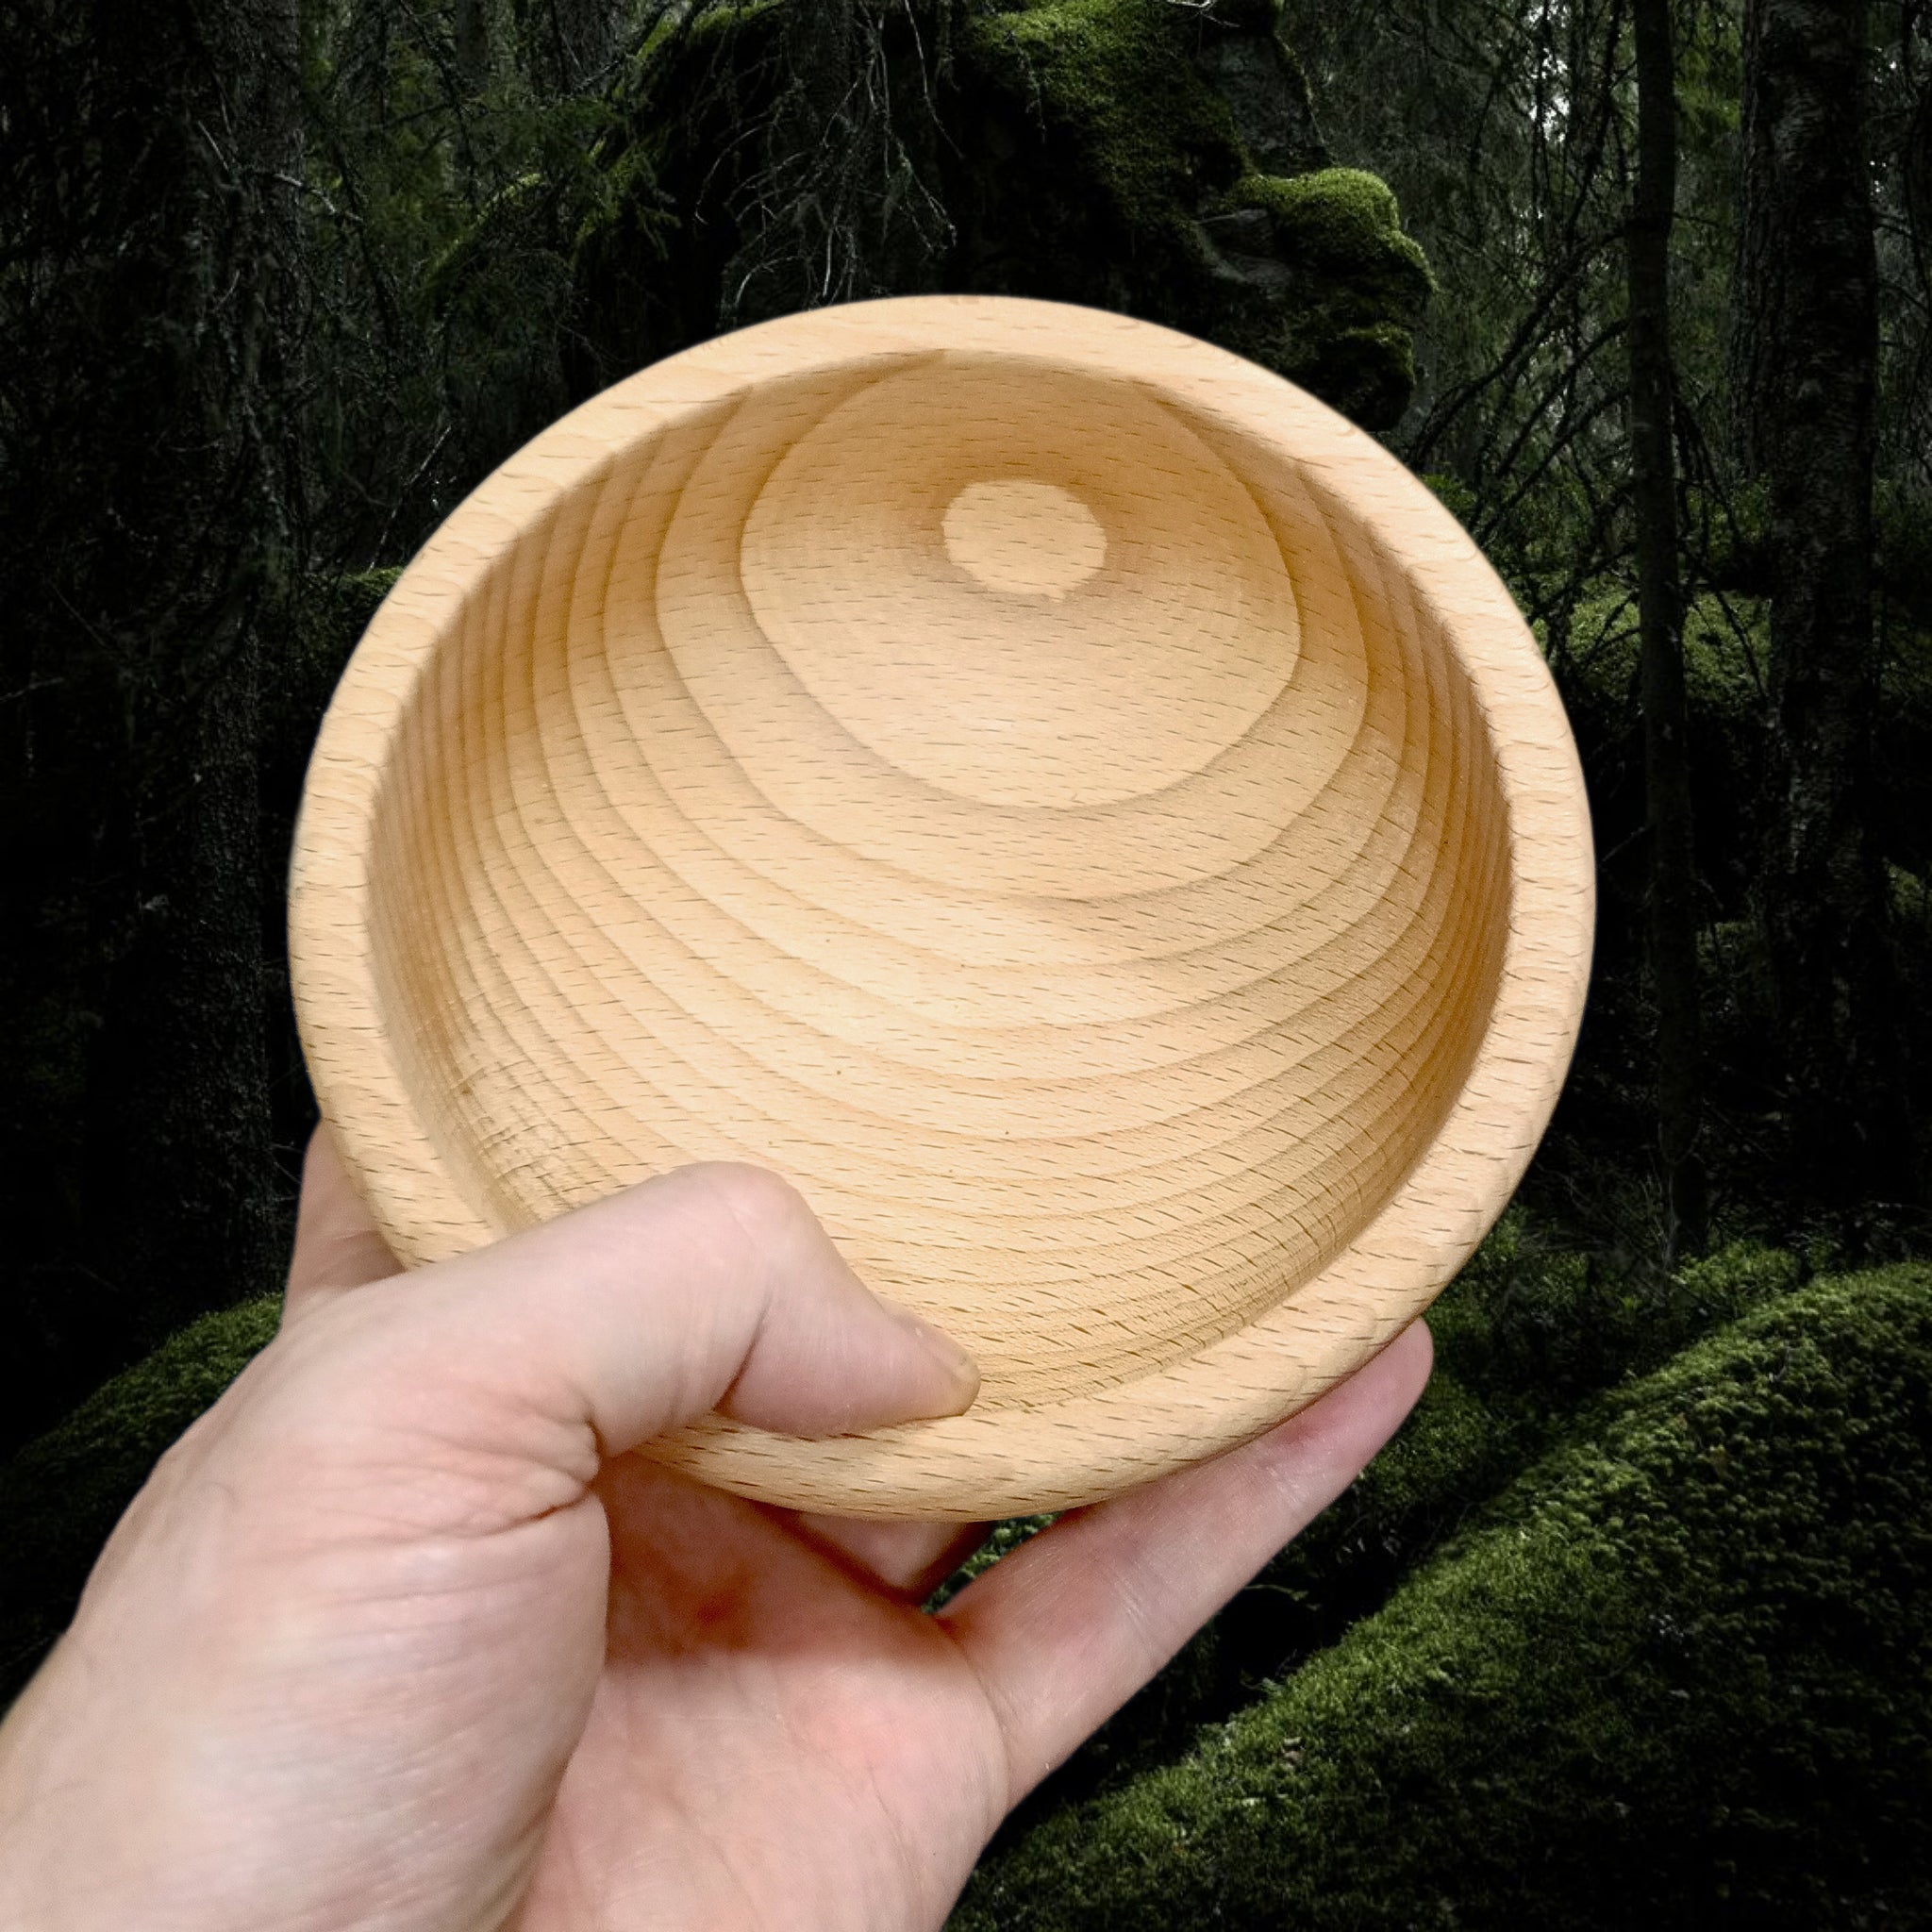 Medium Hand Turned Medieval Wooden Bowl in Hand - Top View